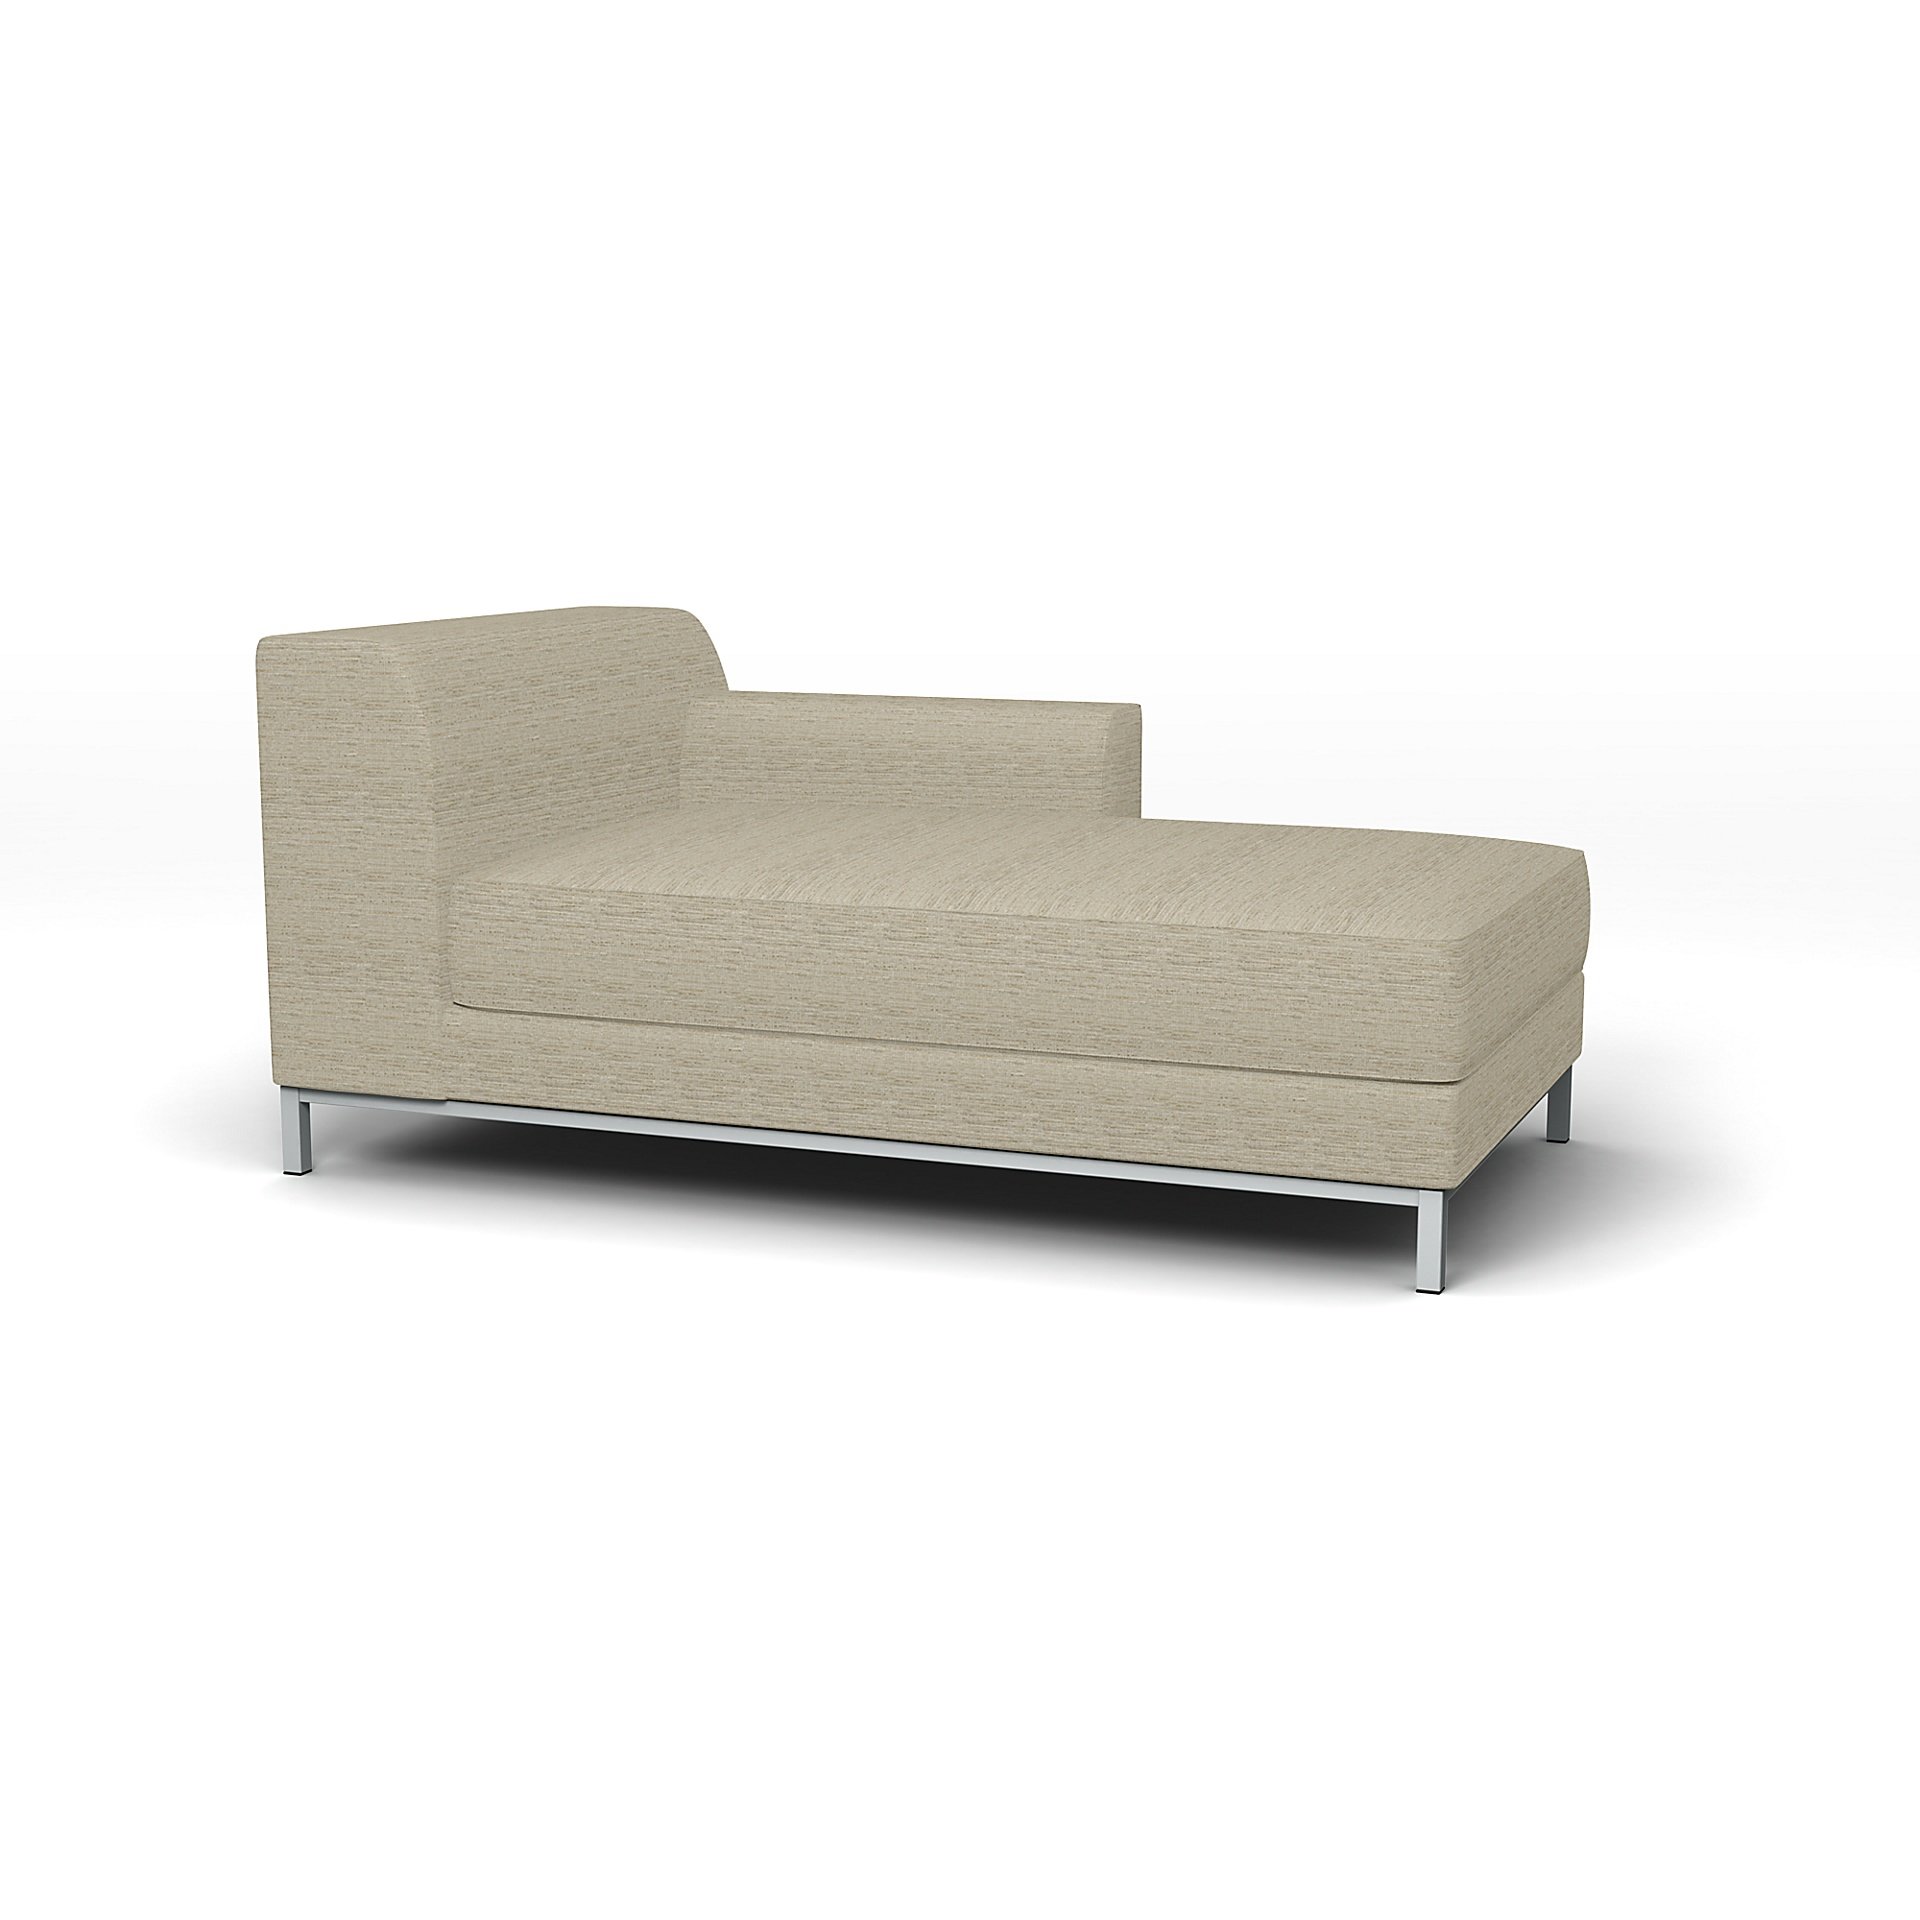 IKEA - Kramfors Chaise Longue with Right Arm Cover, Light Sand, Boucle & Texture - Bemz